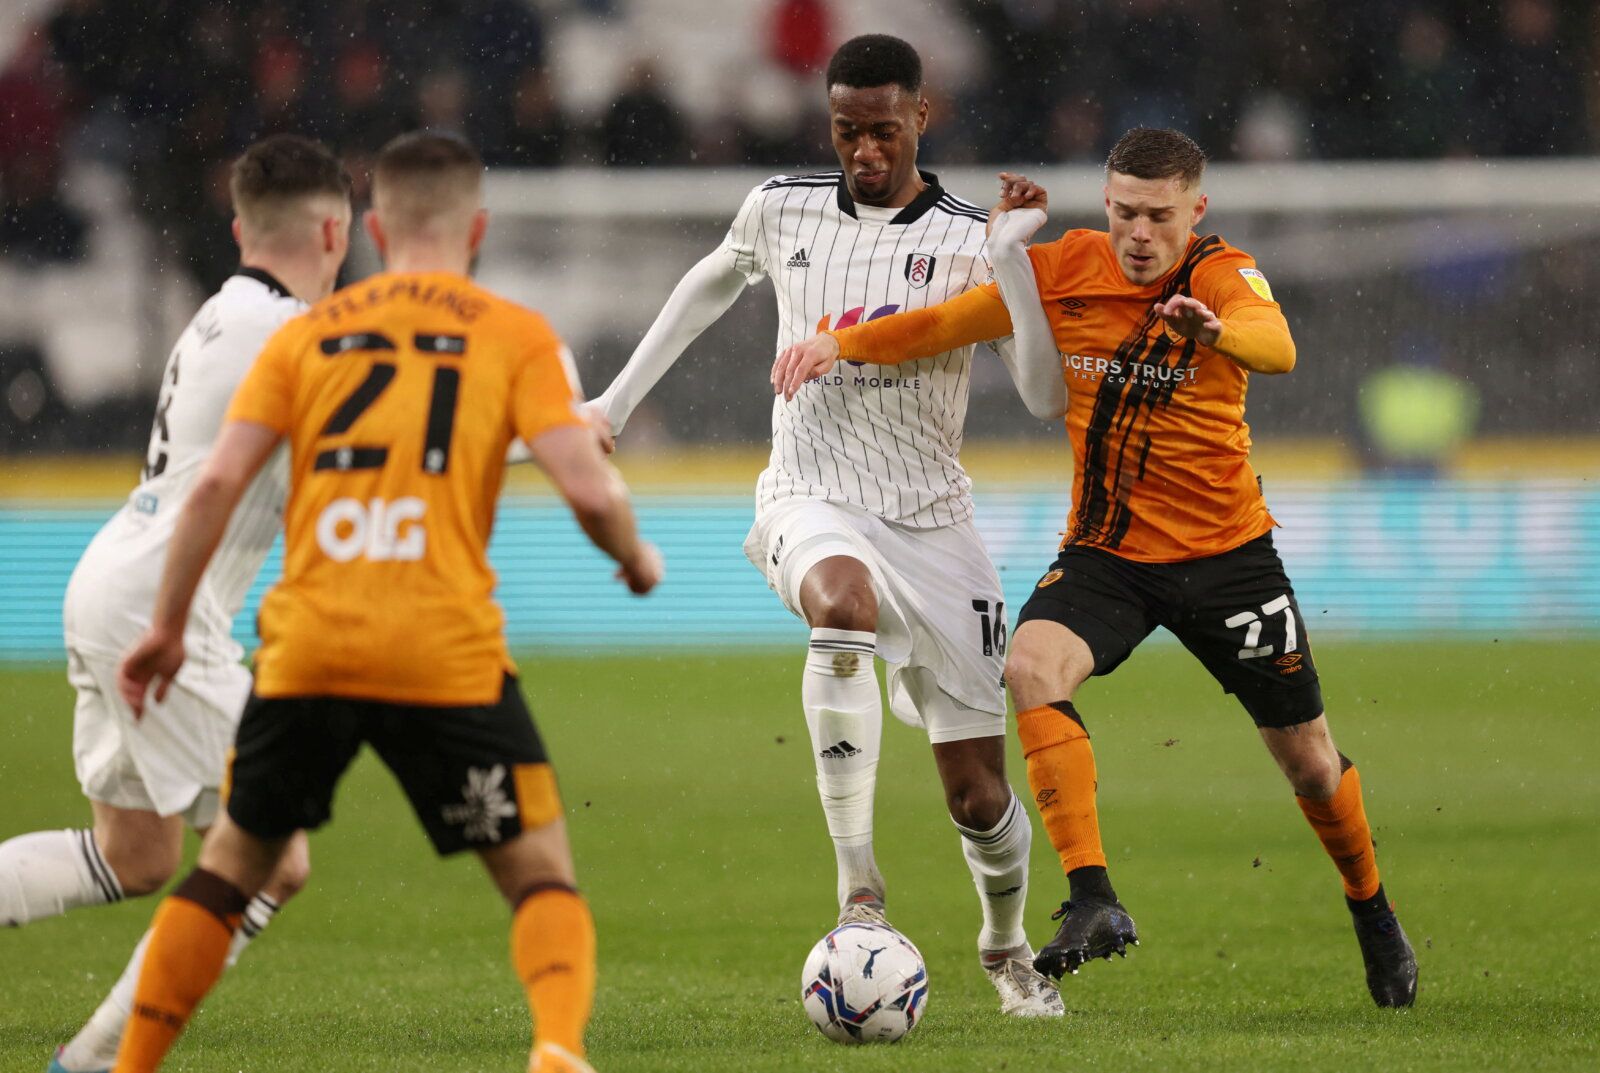 Soccer Football - Championship - Hull City v Fulham - KCOM Stadium, Hull, Britain - February 12, 2022  Fulham's Tosin Adarabioyo in action with Hull City's Regan Slater  Action Images/John Clifton  EDITORIAL USE ONLY. No use with unauthorized audio, video, data, fixture lists, club/league logos or 